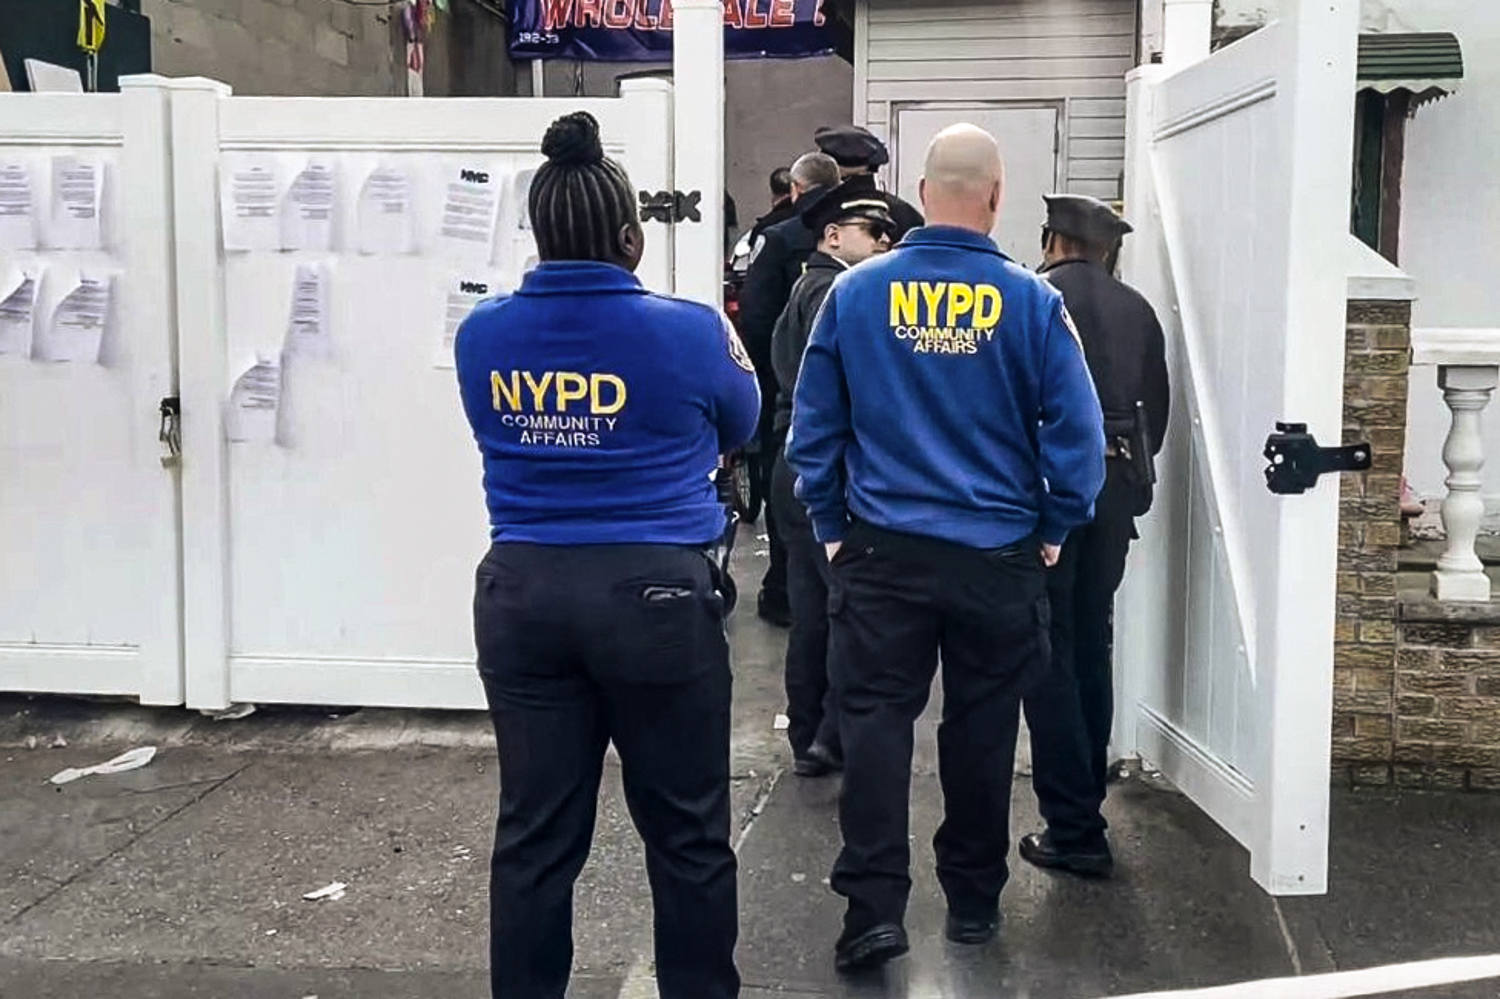 40 migrants found sleeping in New York City basement after e-bike battery tip